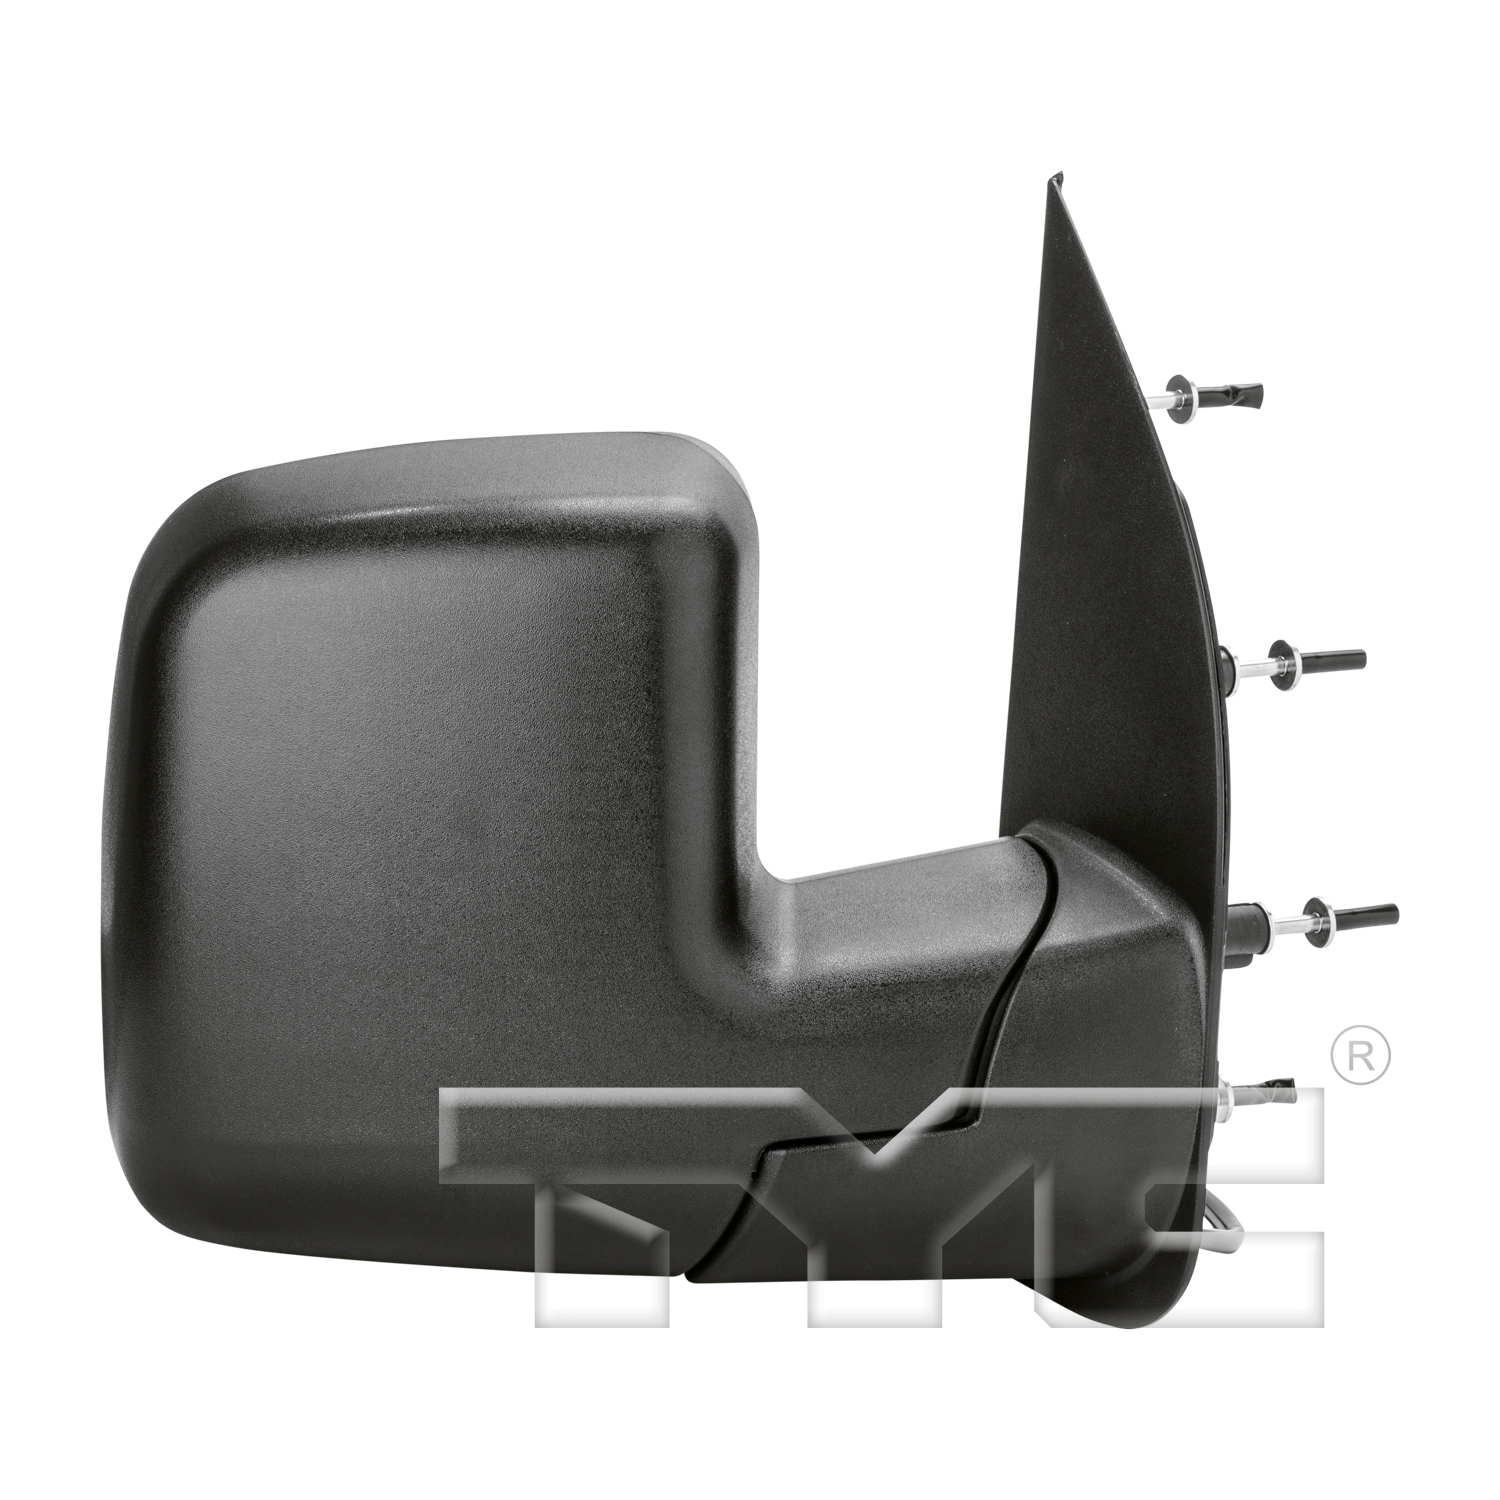 Aftermarket MIRRORS for FORD - E-150 CLUB WAGON, E-150 CLUB WAGON,03-05,RT Mirror outside rear view